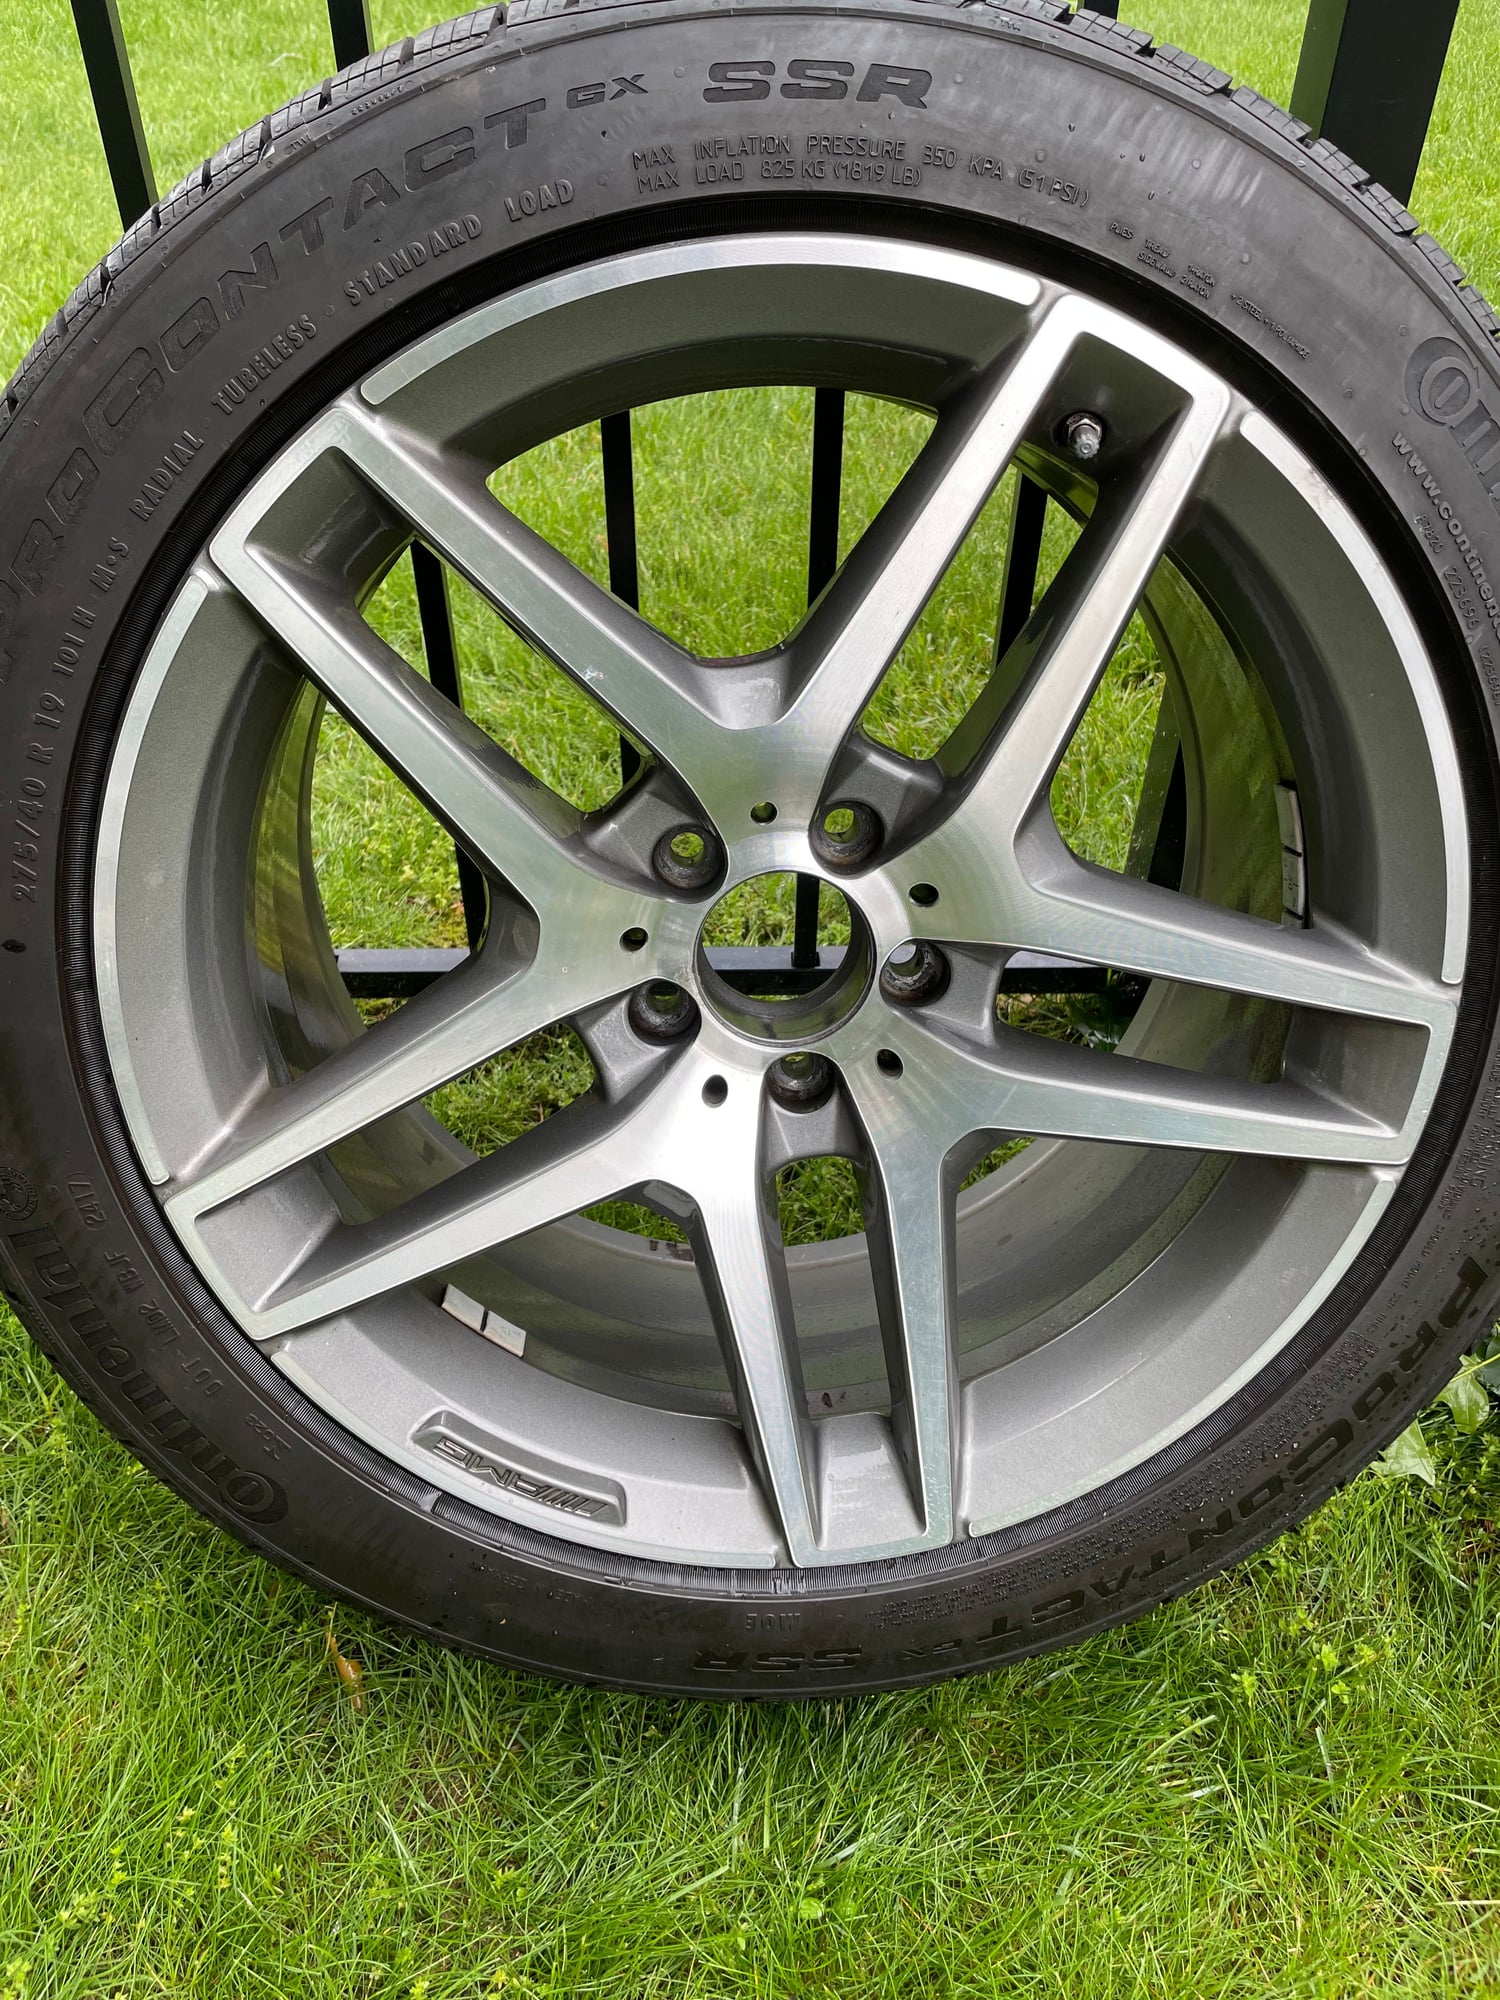 Wheels and Tires/Axles - 19" Mercedes S550 AMG Wheels and Tires - Used - 2015 to 2021 Mercedes-Benz S550 - Commack, NY 11725, United States